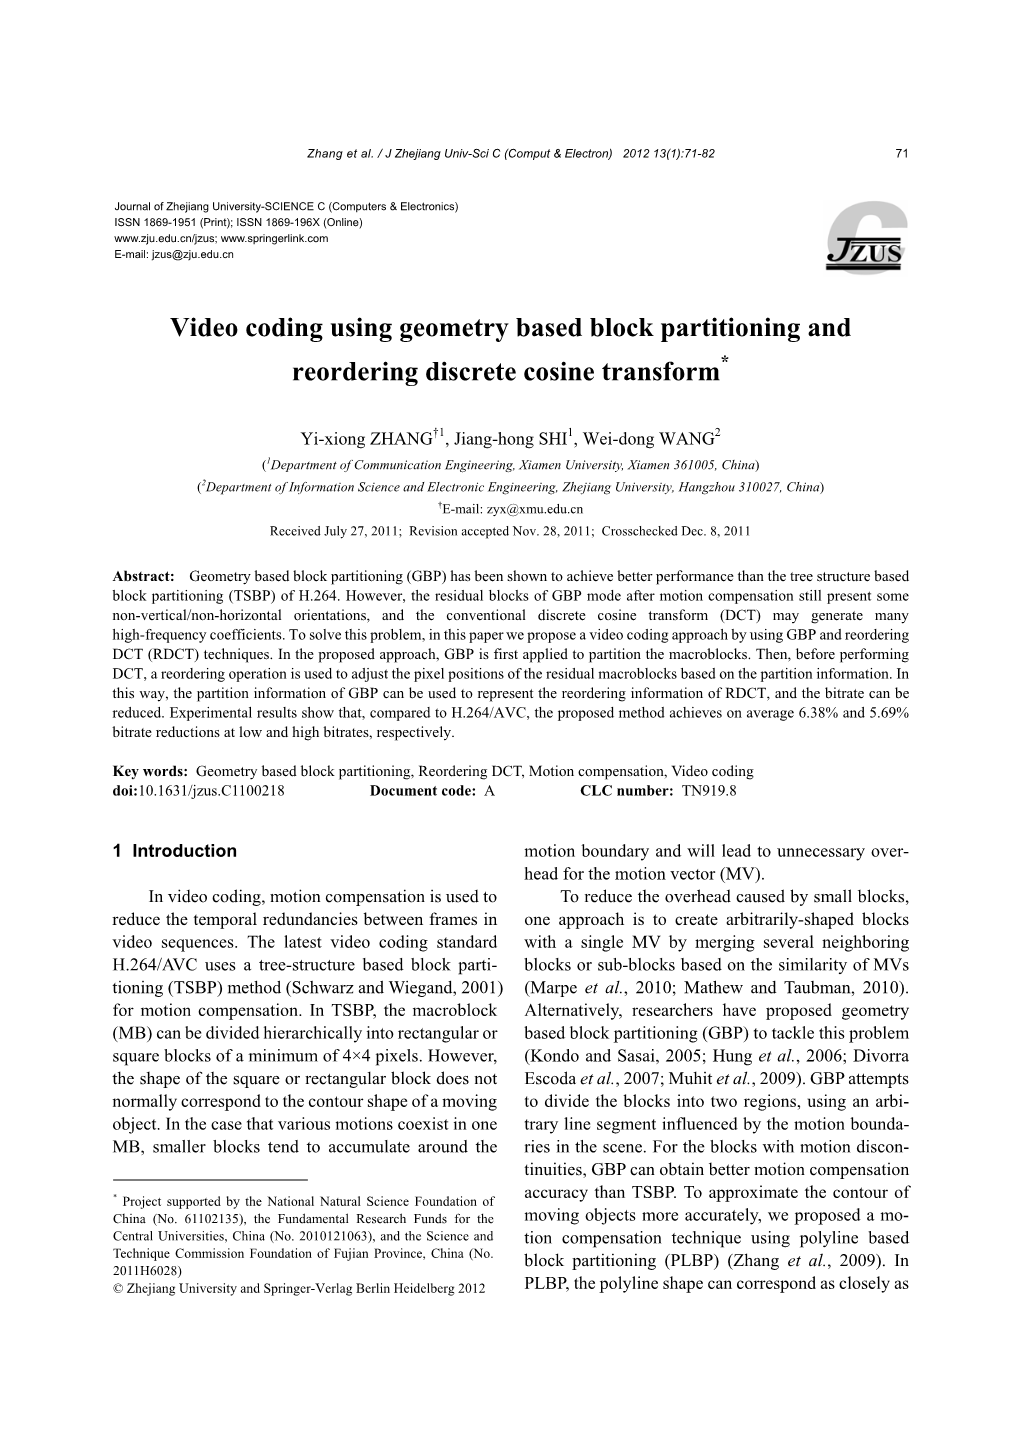 Video Coding Using Geometry Based Block Partitioning and Reordering Discrete Cosine Transform*